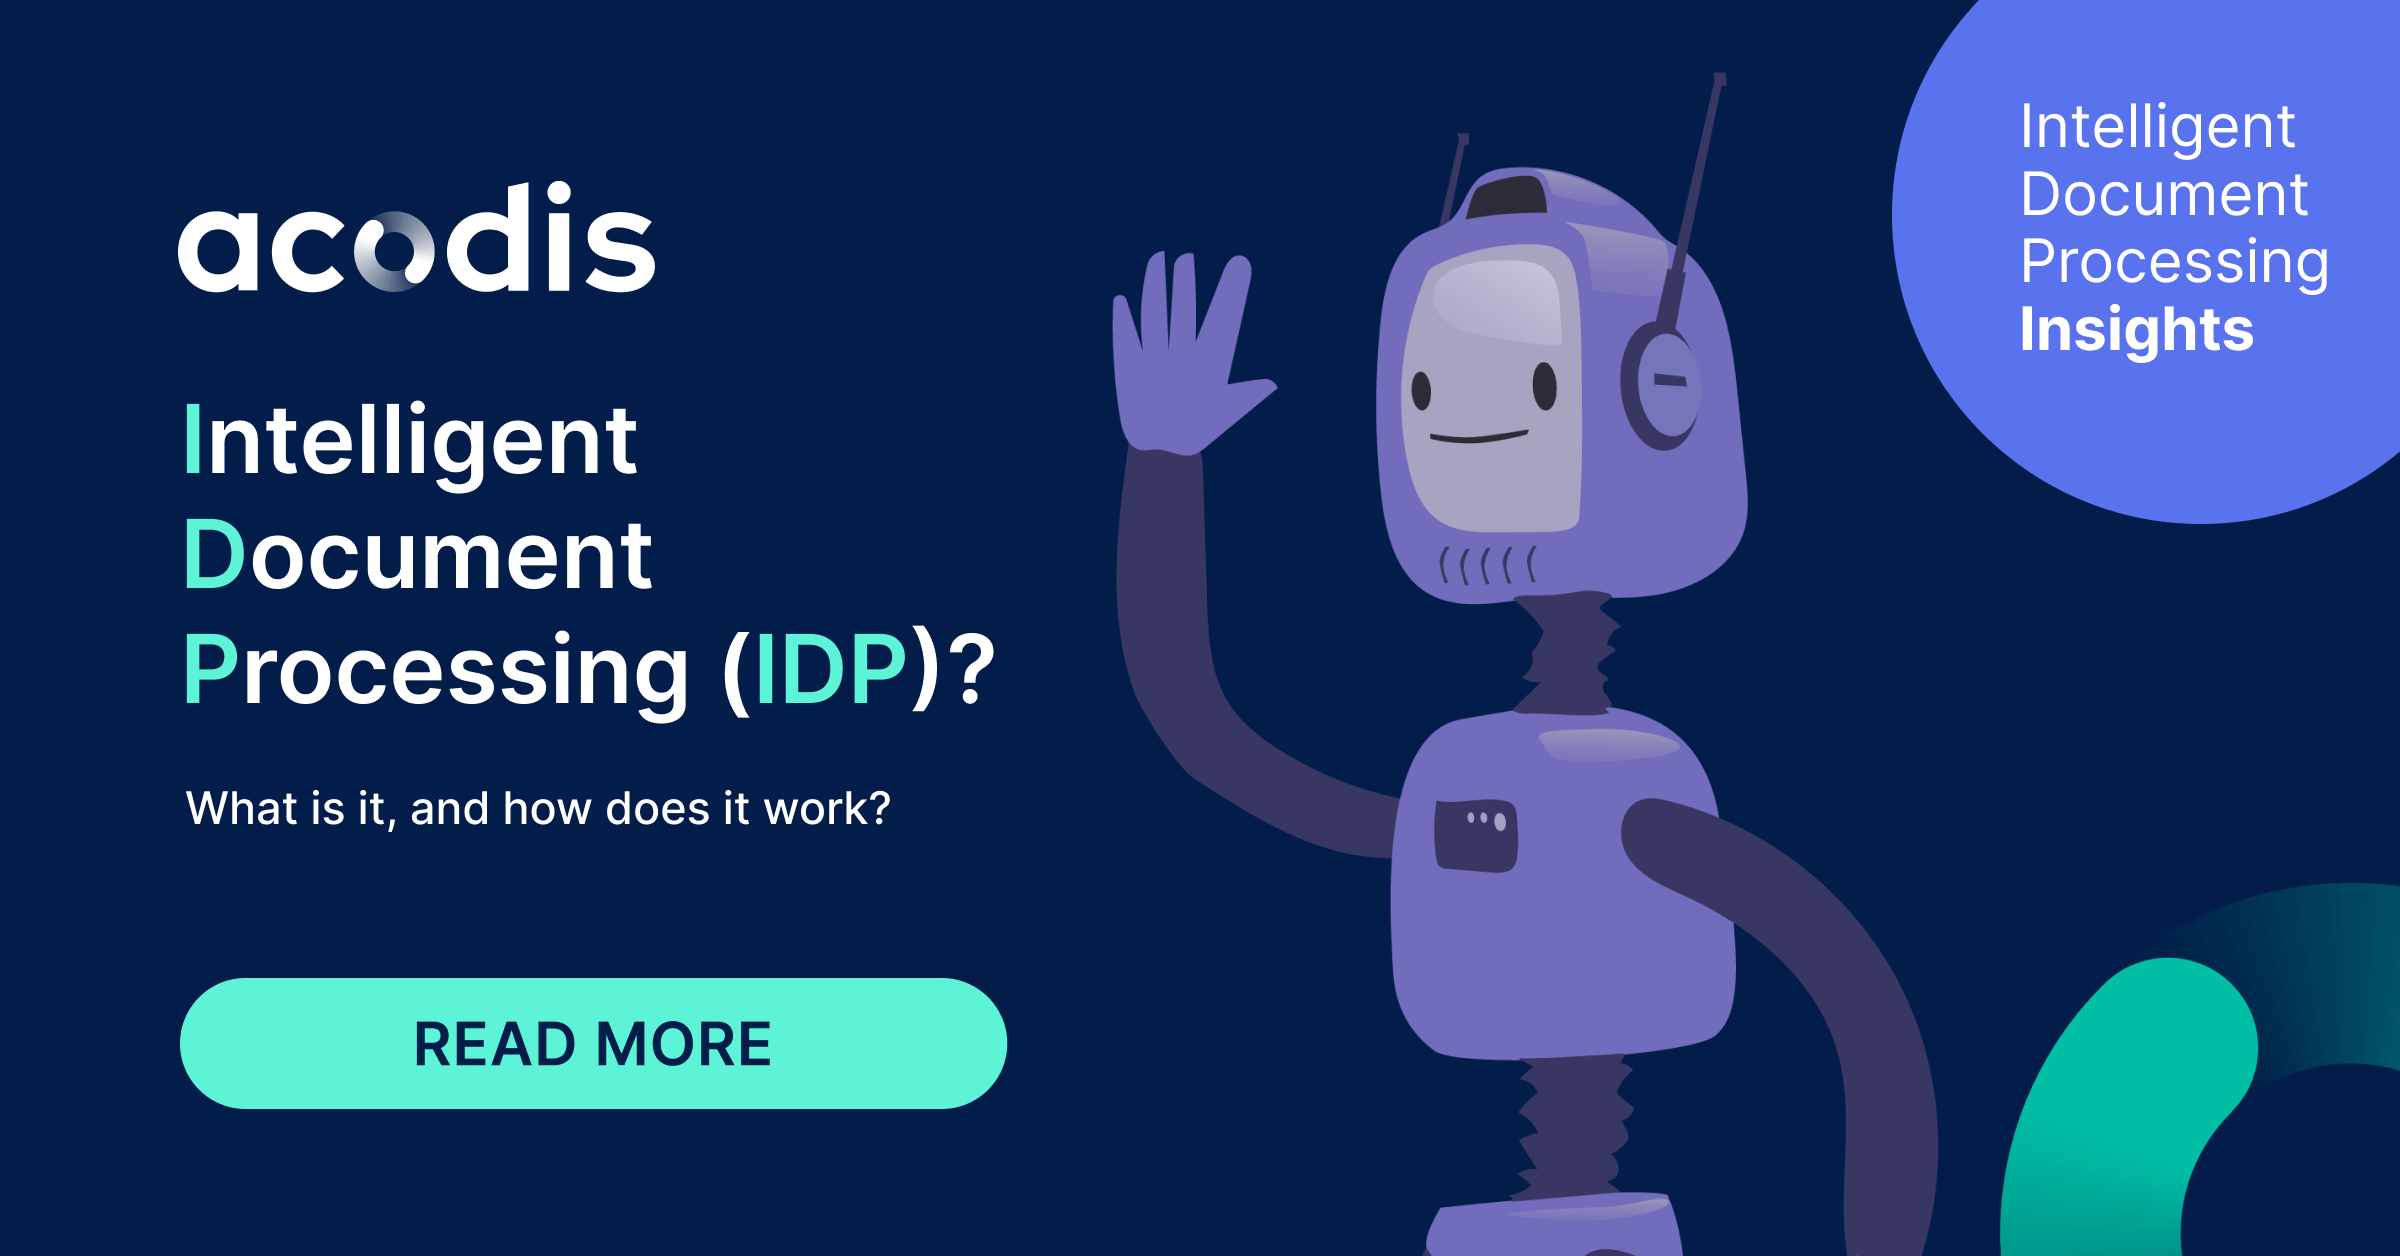 What Is Intelligent Document Processing (IDP)?